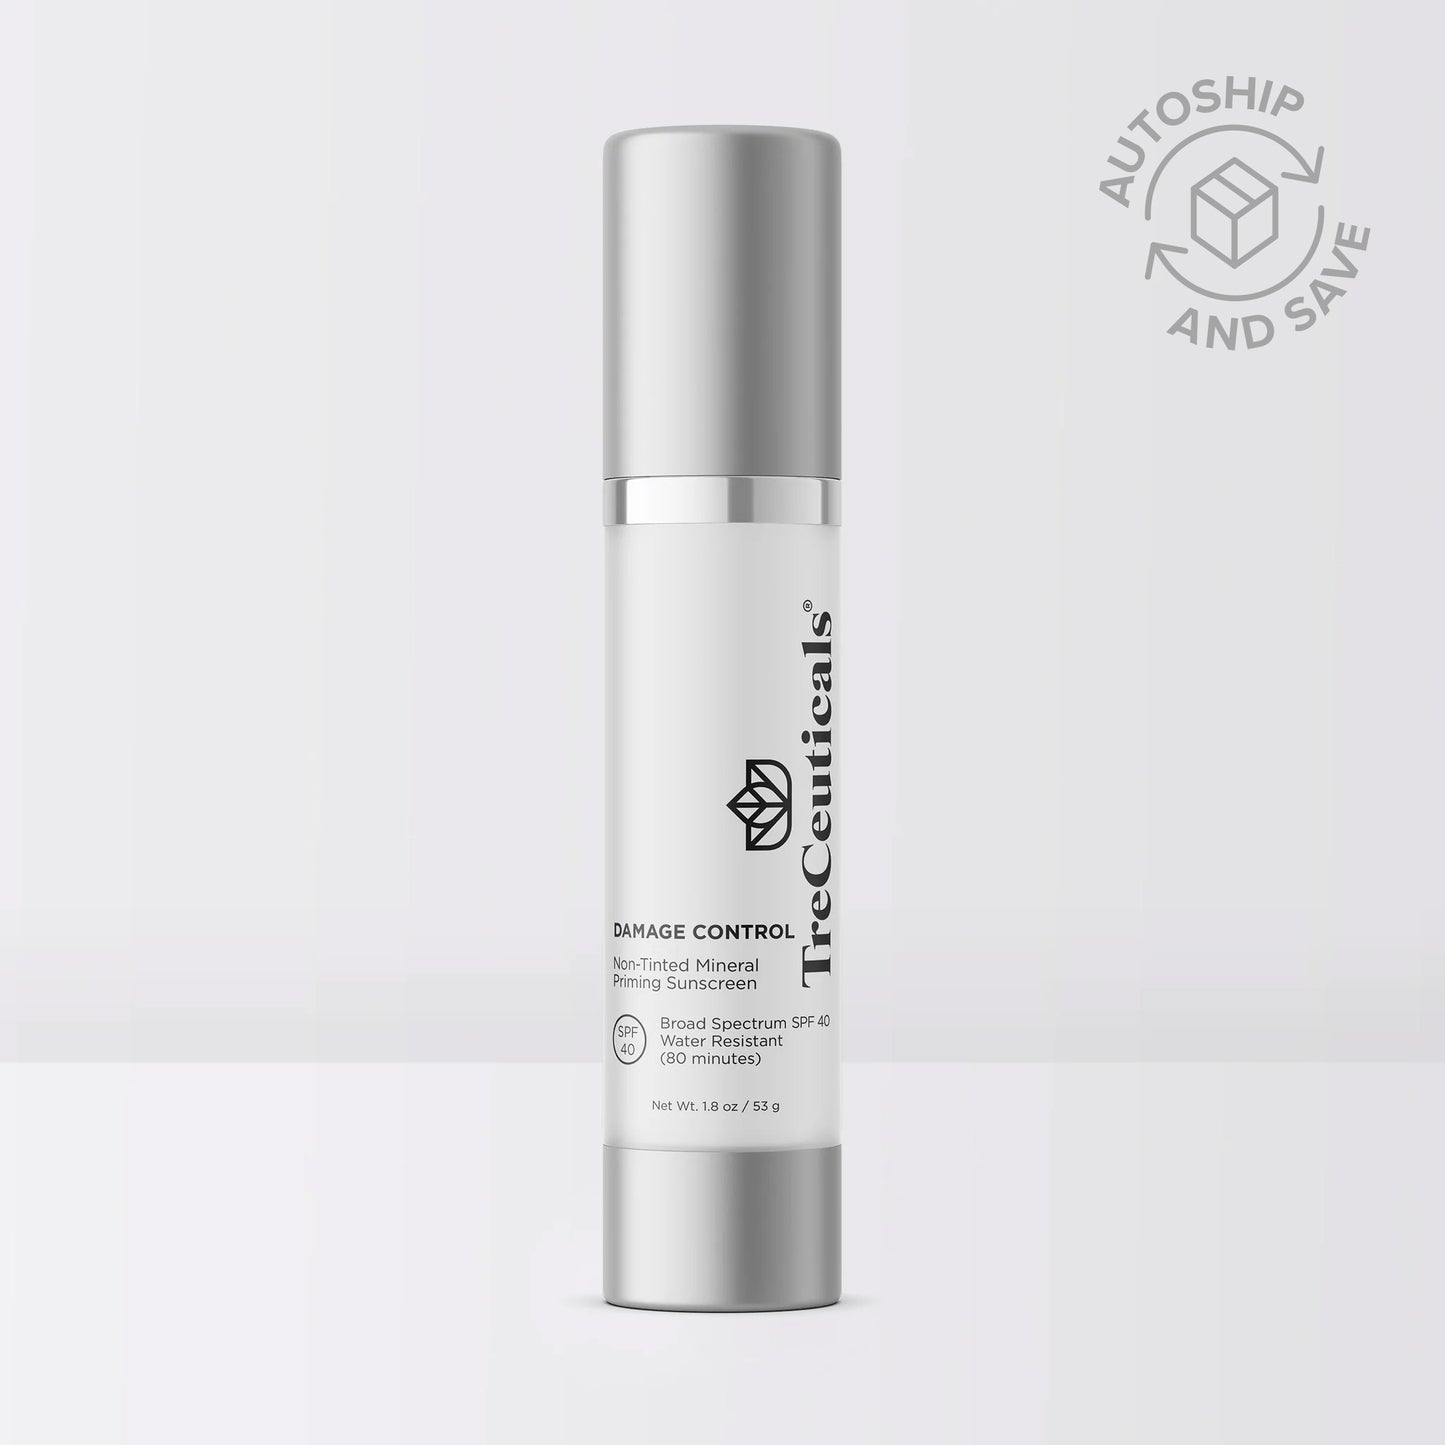 Damage Control Non-Tinted Mineral Sunscreen